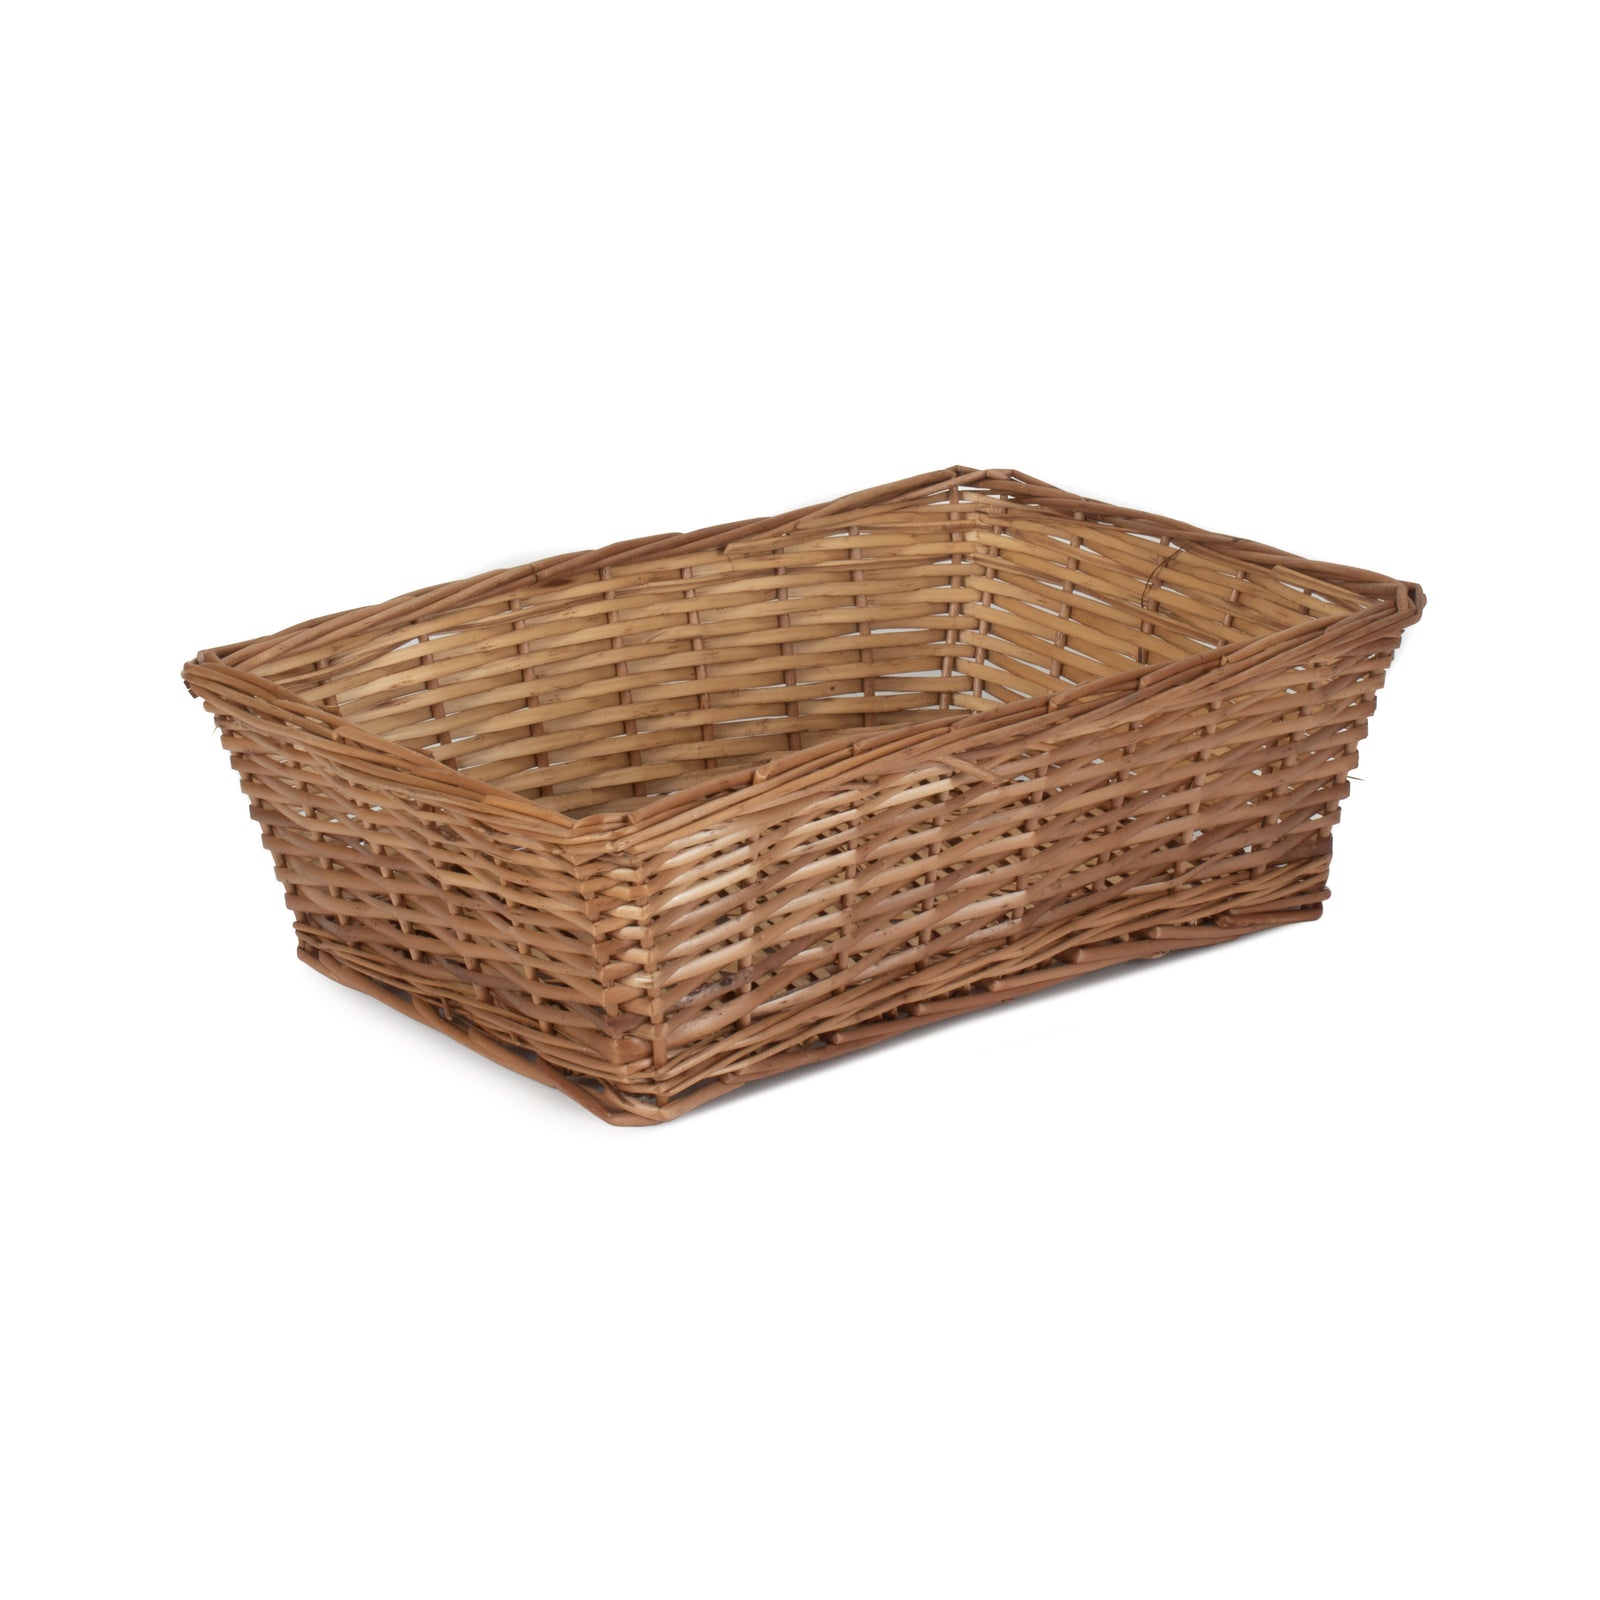 Red Hamper Tapered Split Willow Tray